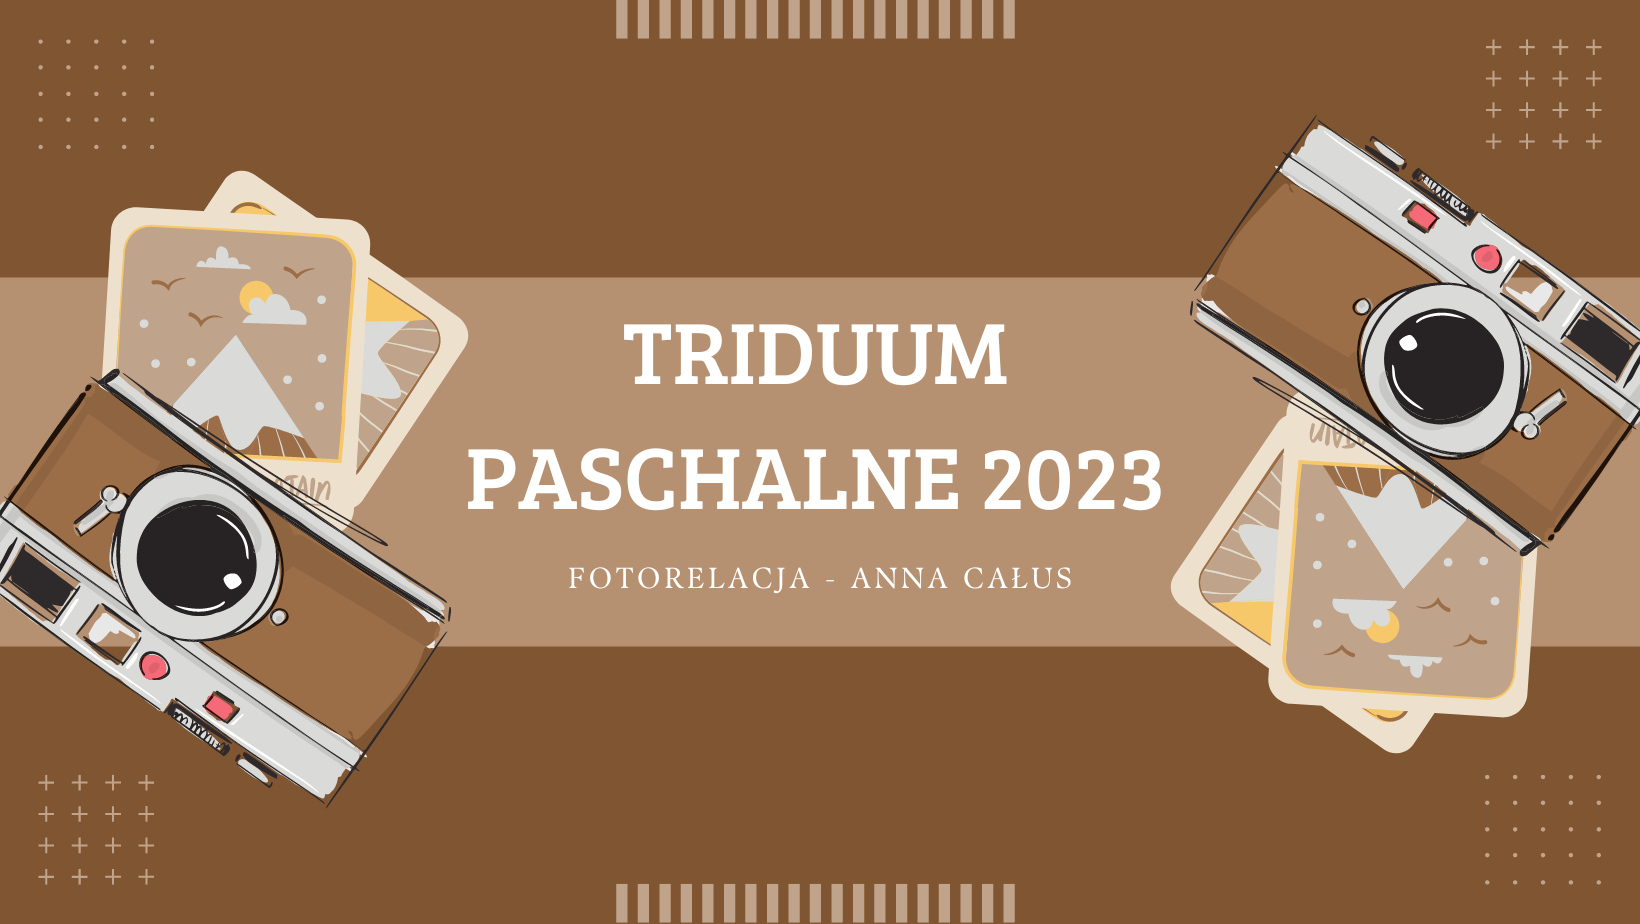 You are currently viewing Triduum Paschalne 2023 – fotorelacja